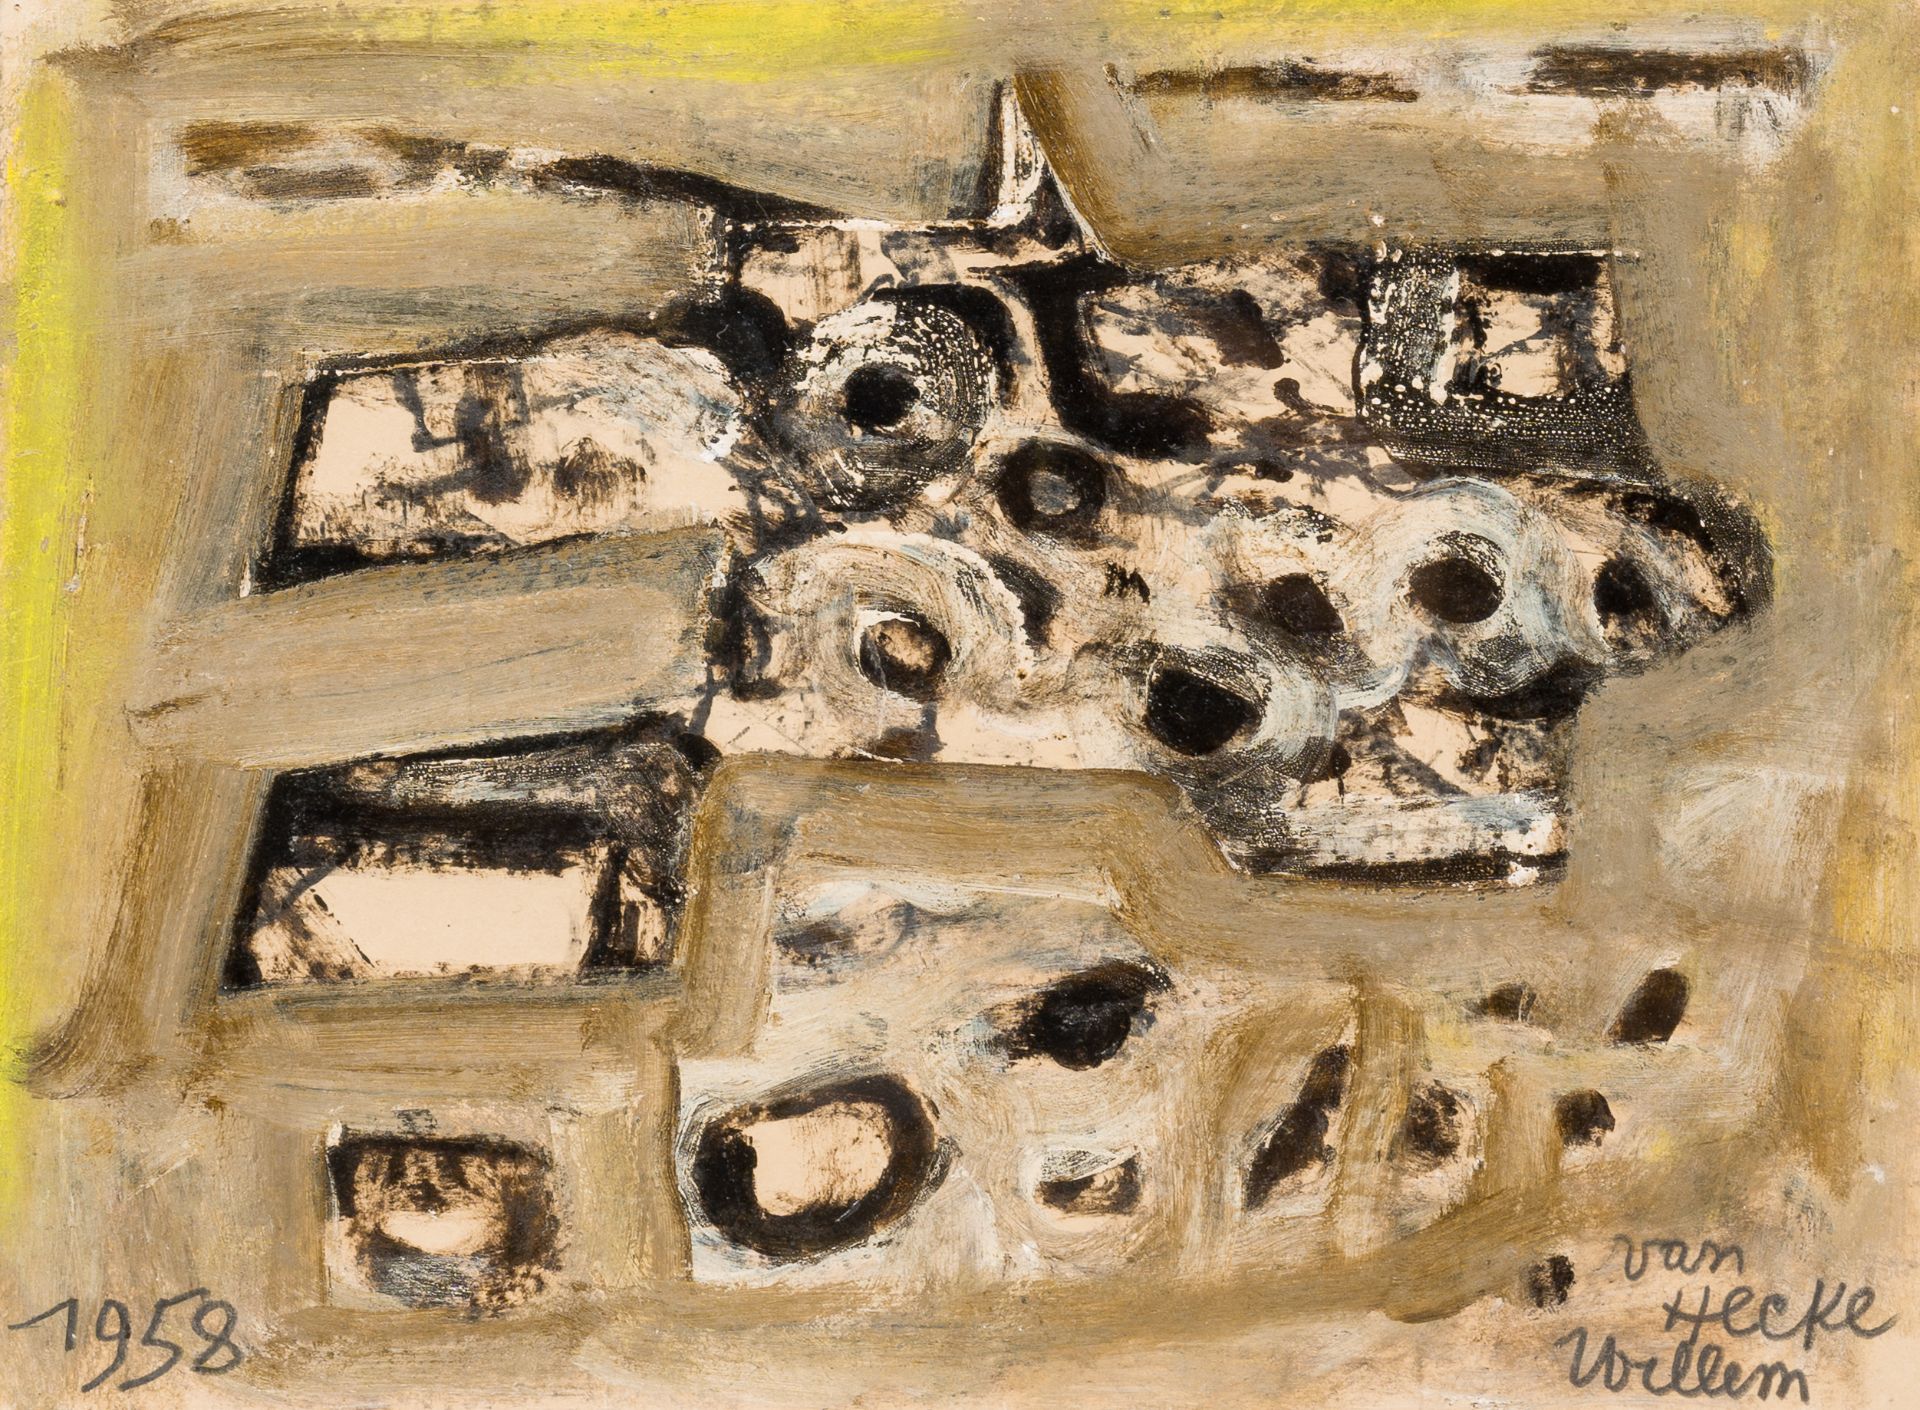 Willem Van Hecke (1893-1976): Abstract composition, oil on paper marouflated on board, dated 1958